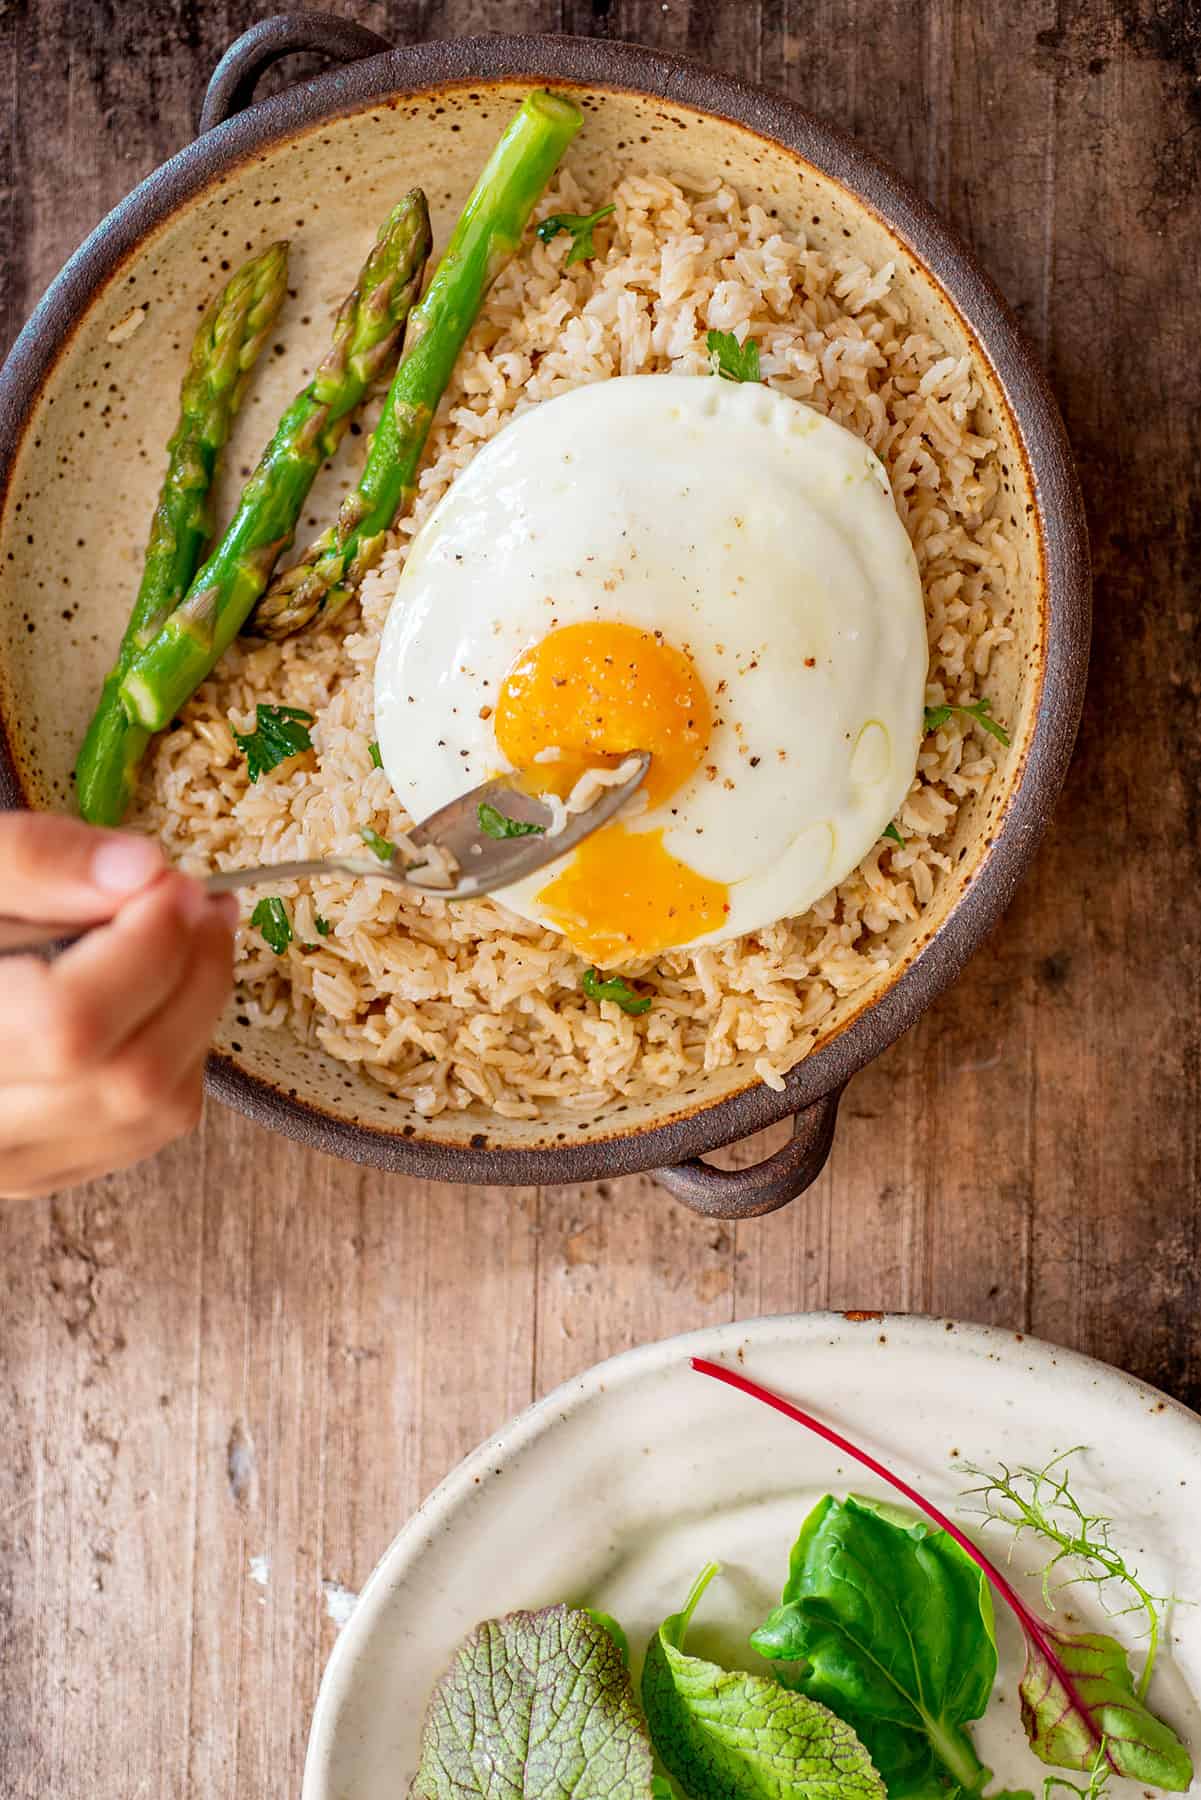 Brown rice pilaf served with egg.